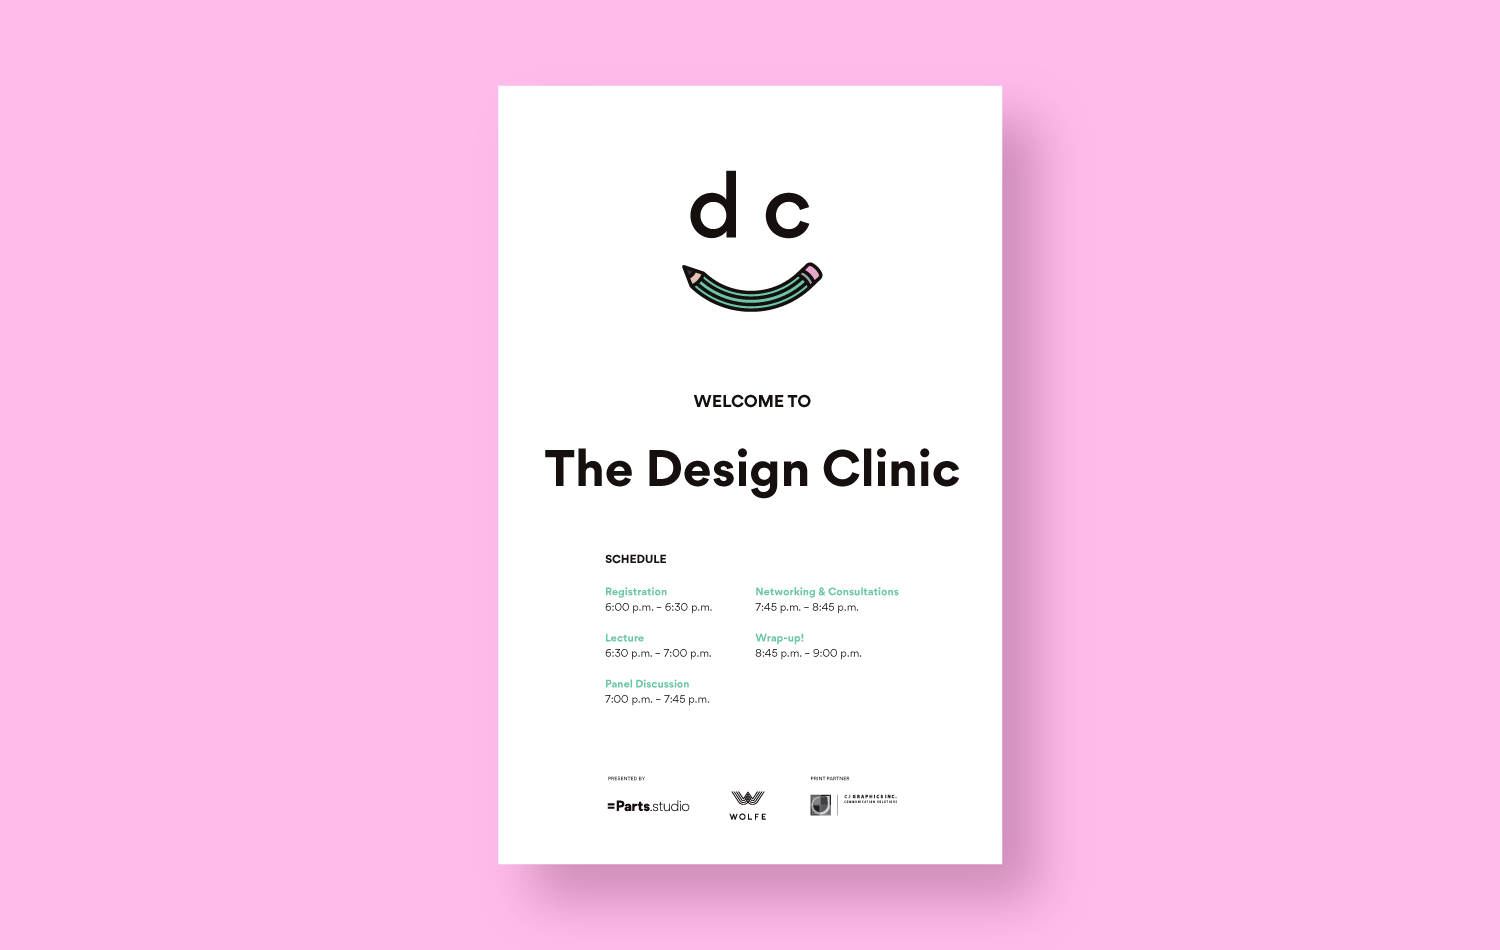 Design Clinic Welcome Sign